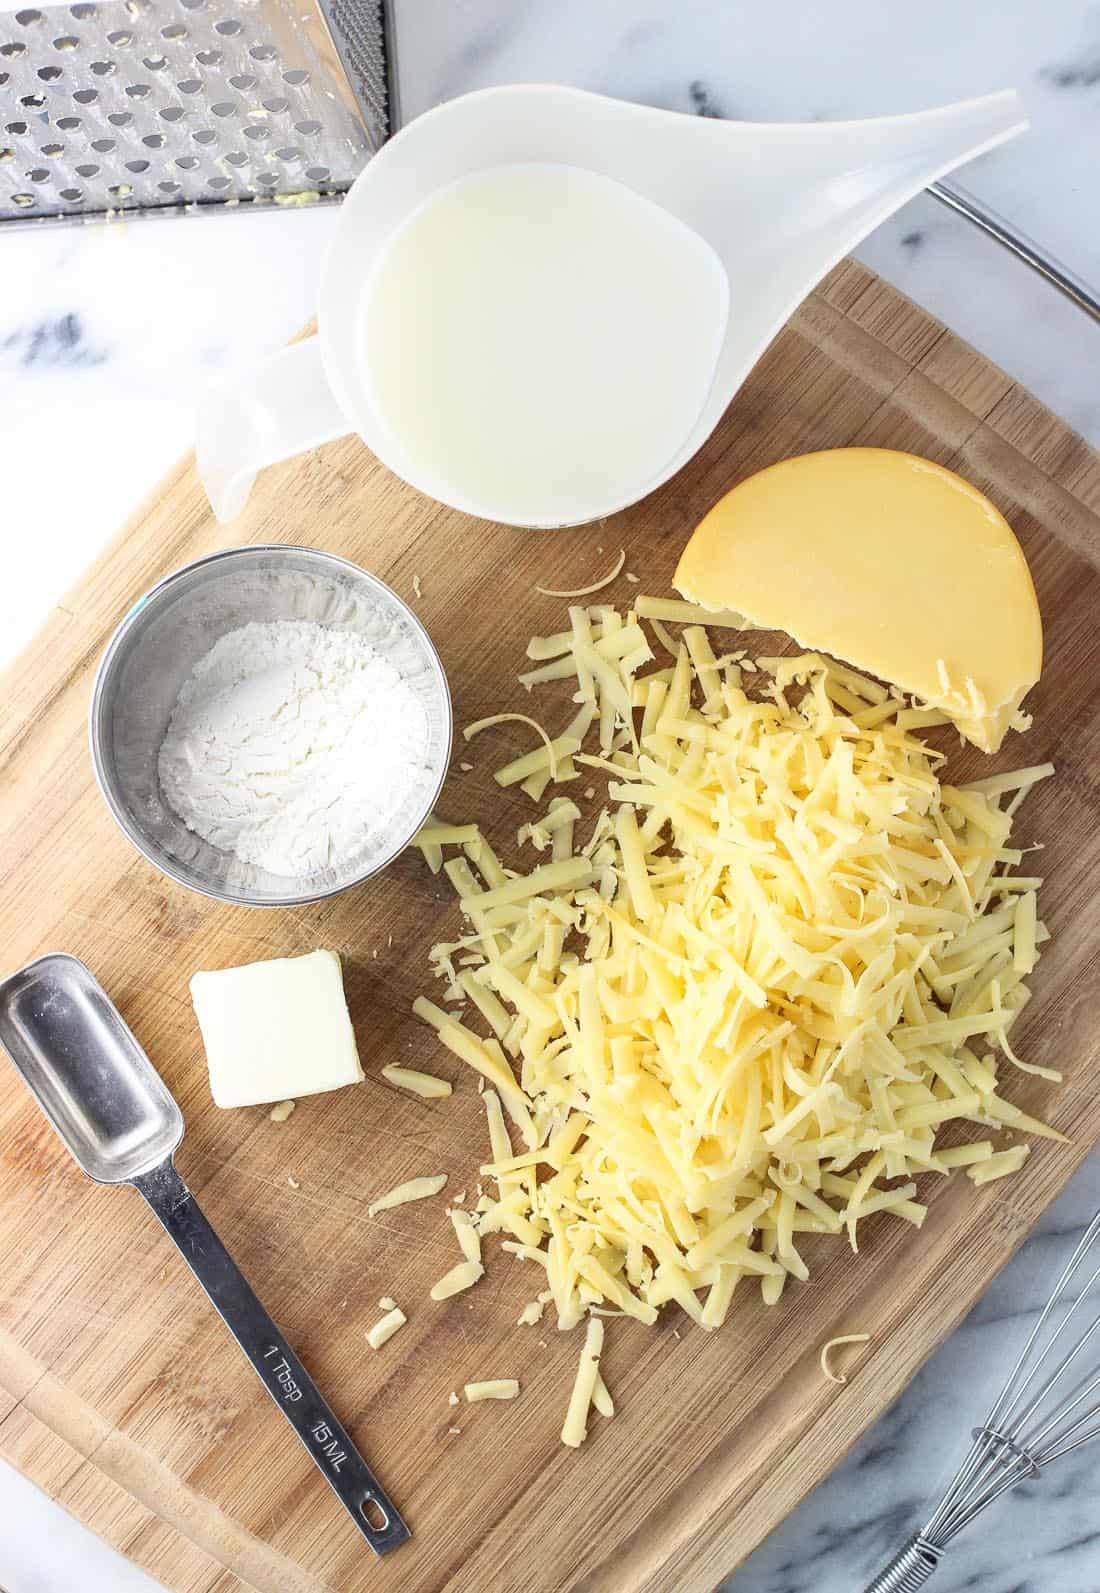 The gouda dip ingredients on a wooden cutting board.